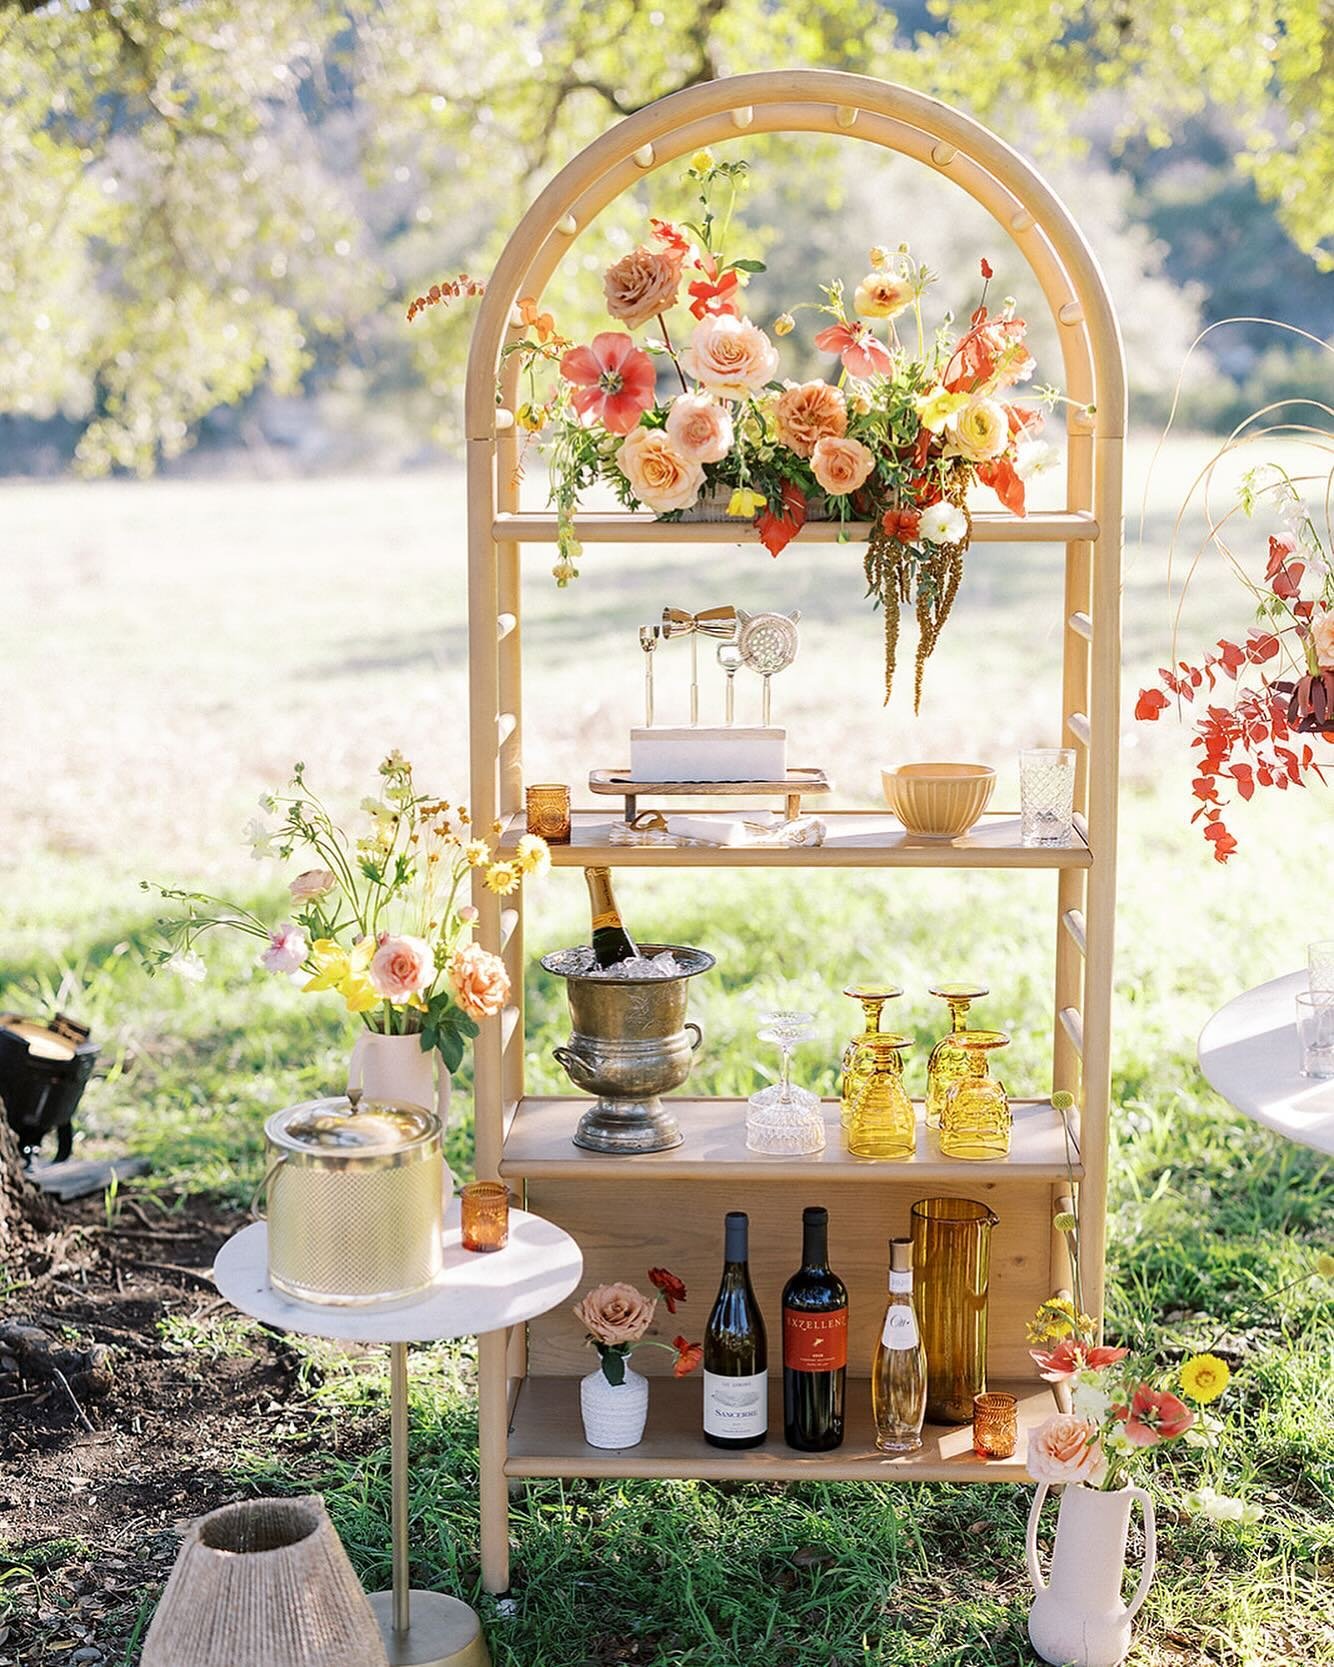 Self served bar ready!! Zoom in to see all the beautiful details we added to the shelf!  Event Planning and design: @minteventdesign
Rentals: @beelavish
Lighting: @filoproductionsatx 
Florals: @nativebloomfloral 
Cake: @eltoquedulce.atx 
Photography: